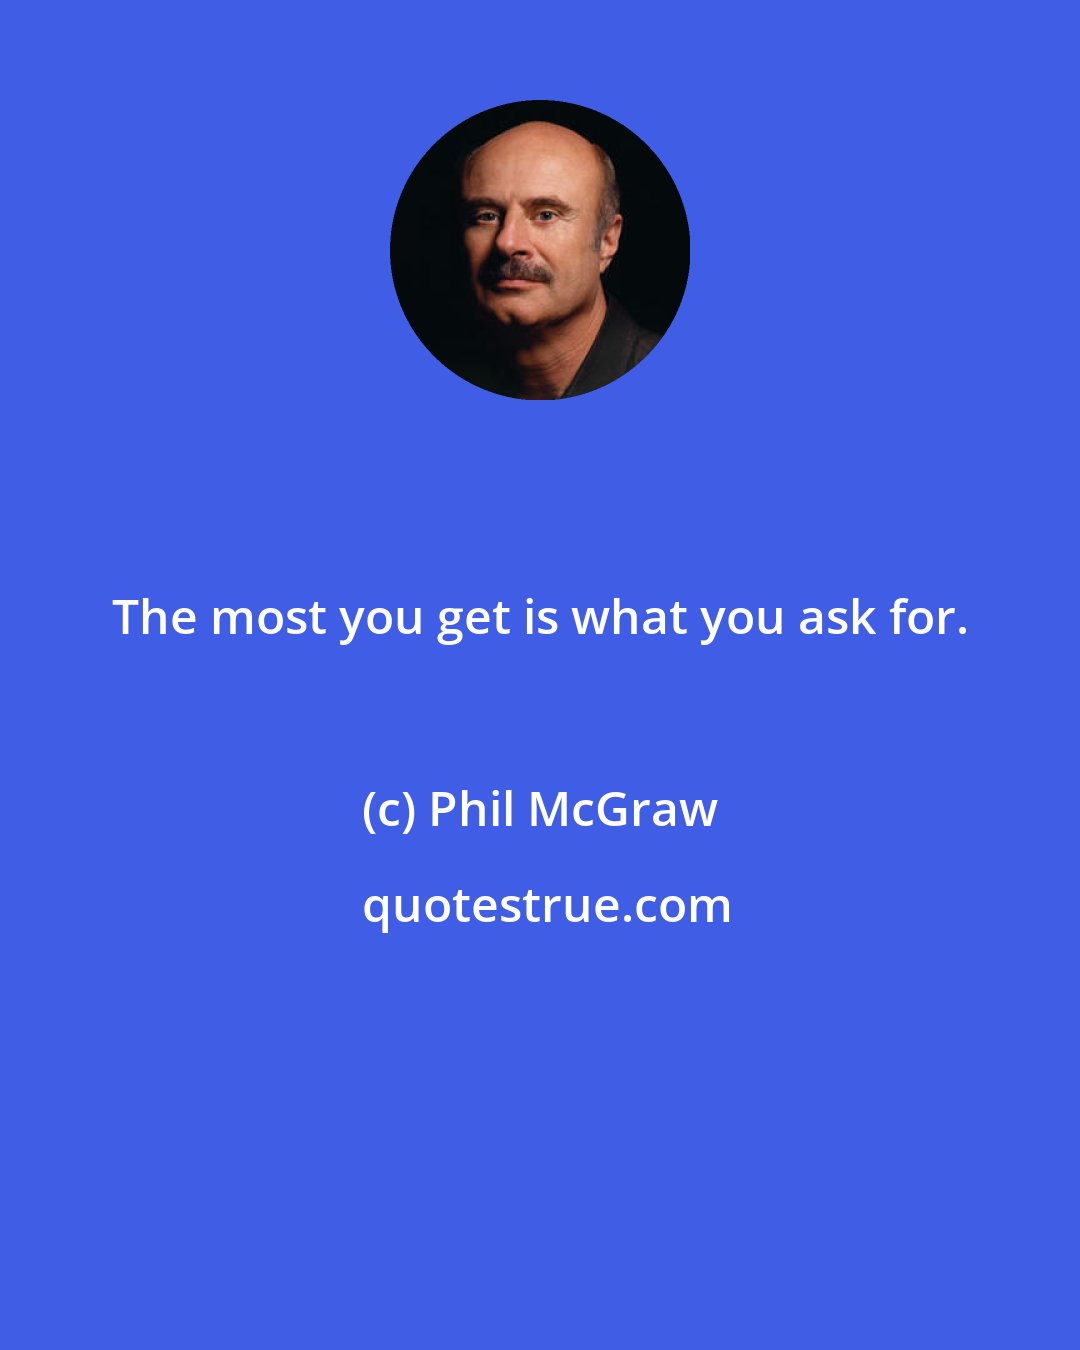 Phil McGraw: The most you get is what you ask for.